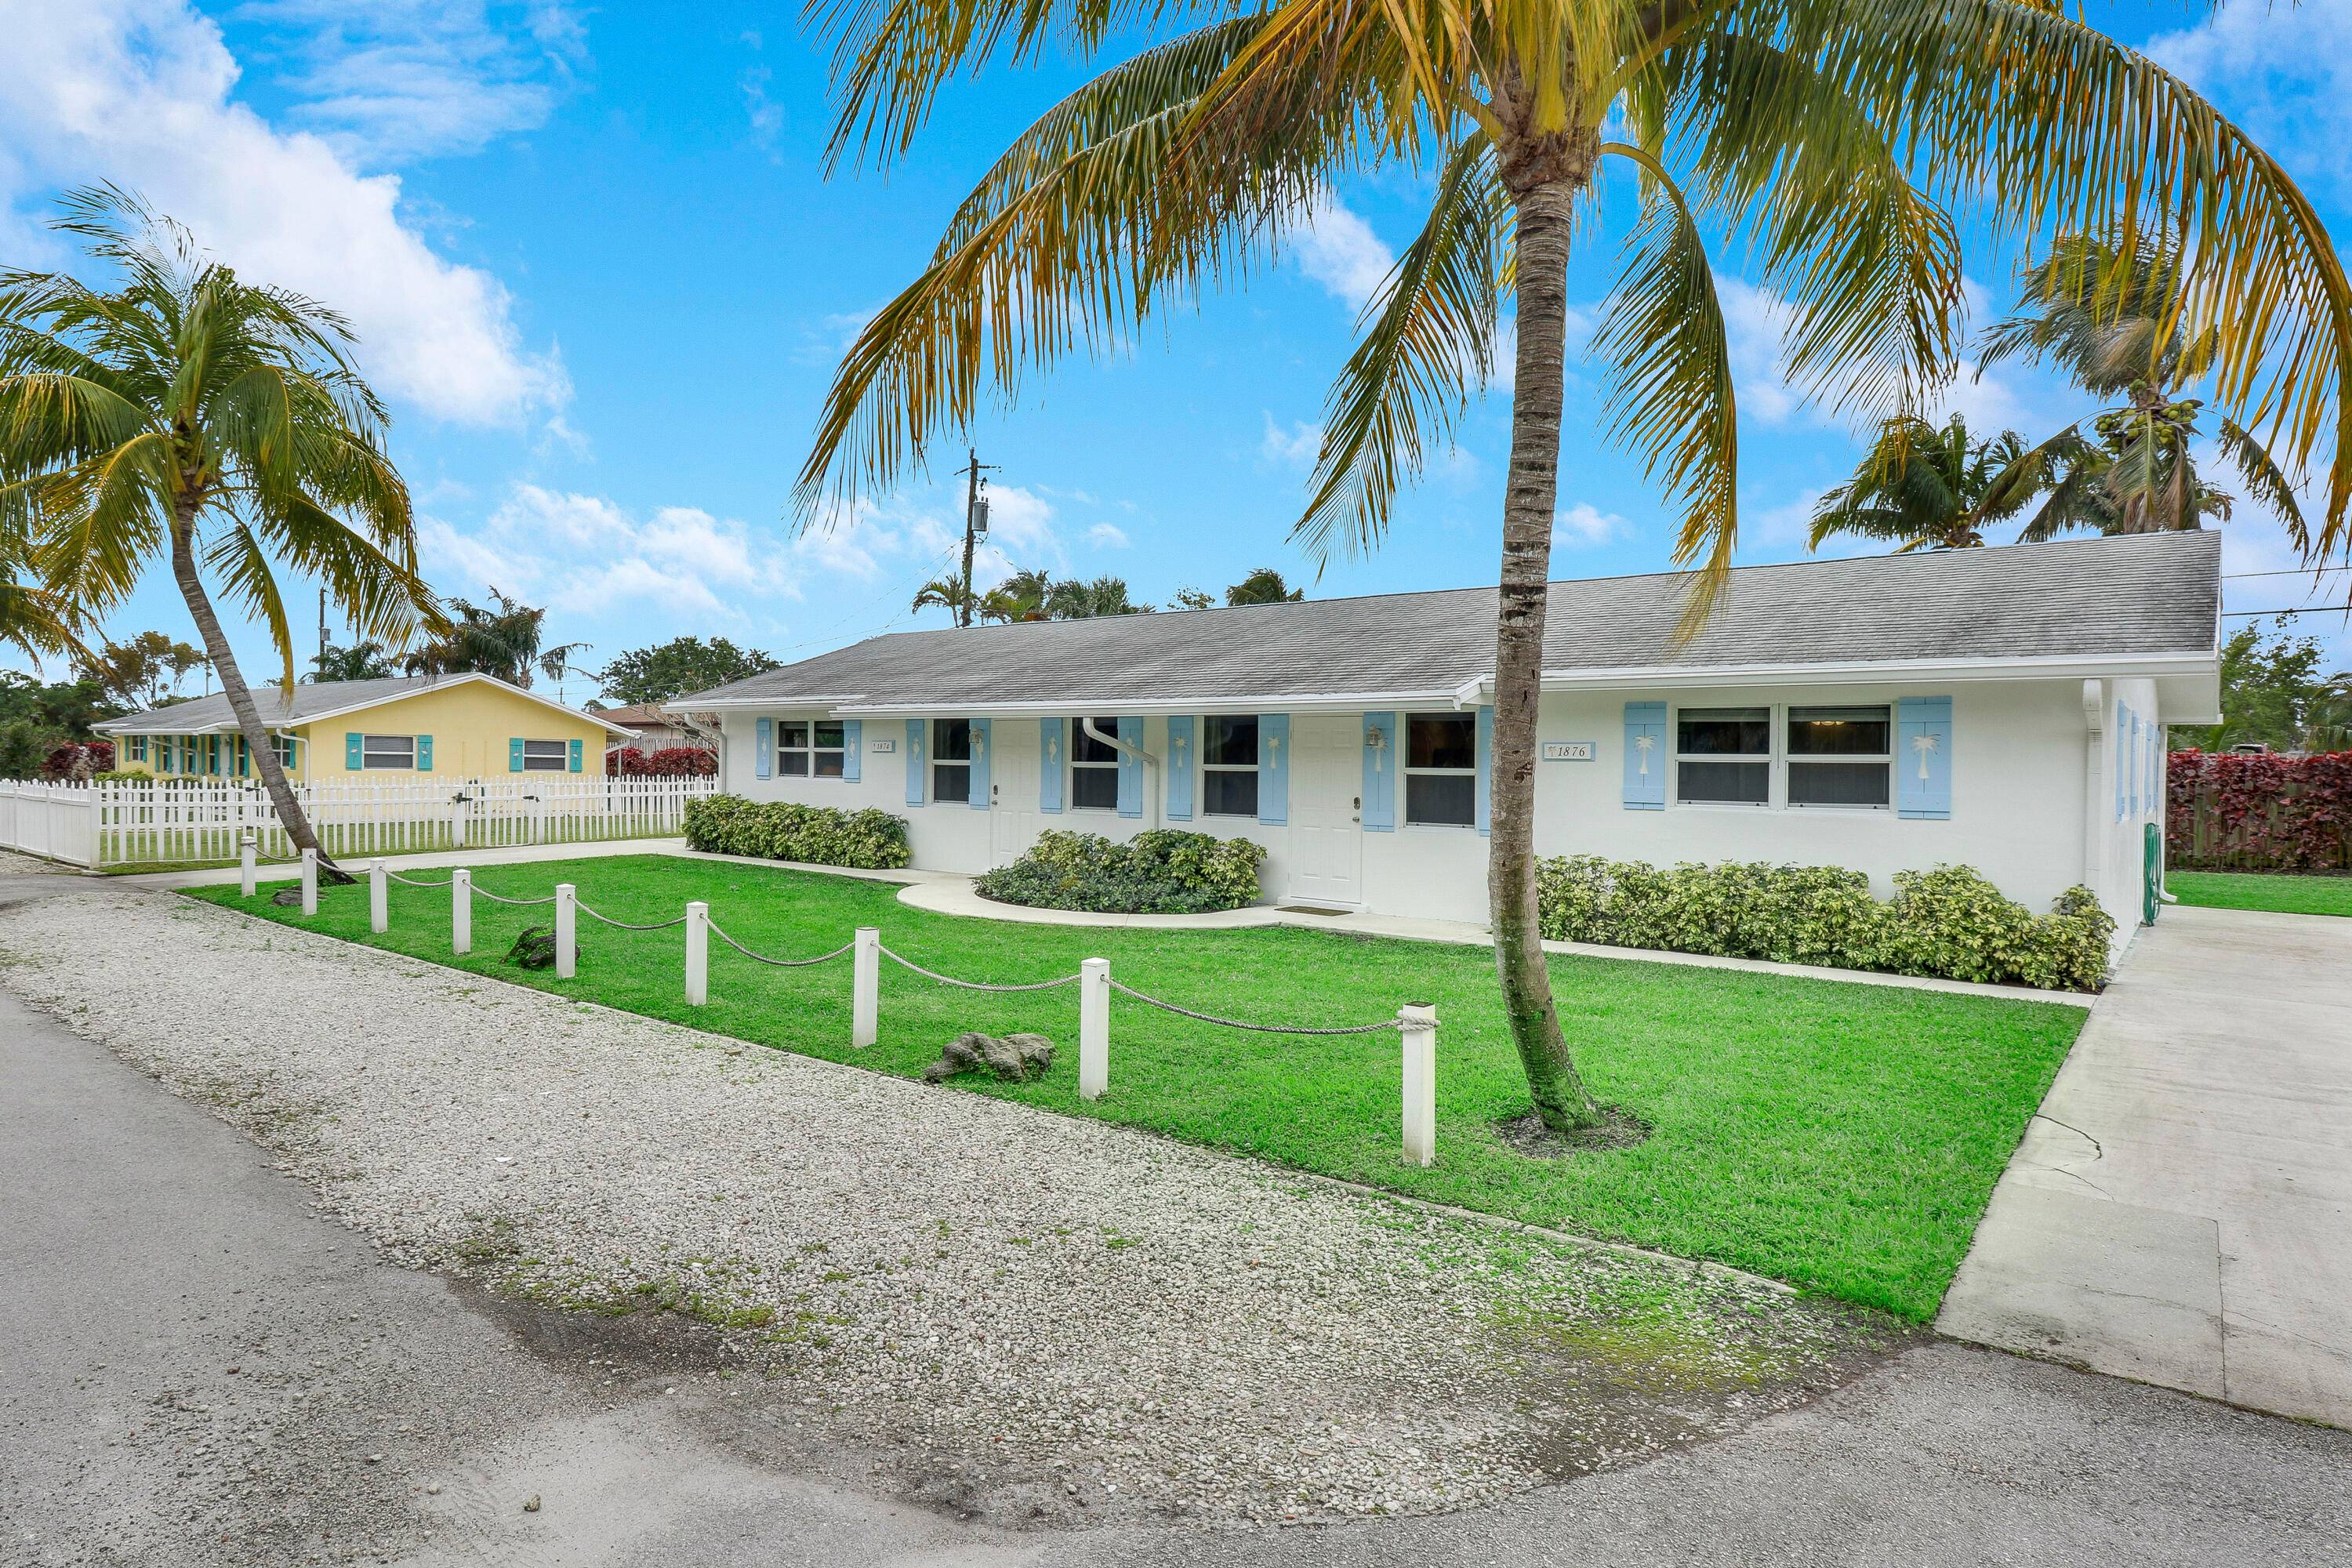 Incredible double duplex multifamily opportunity down the street from the under construction Ritz Carlton Residences and the PGA Blvd corridor in Palm Beach Gardens.